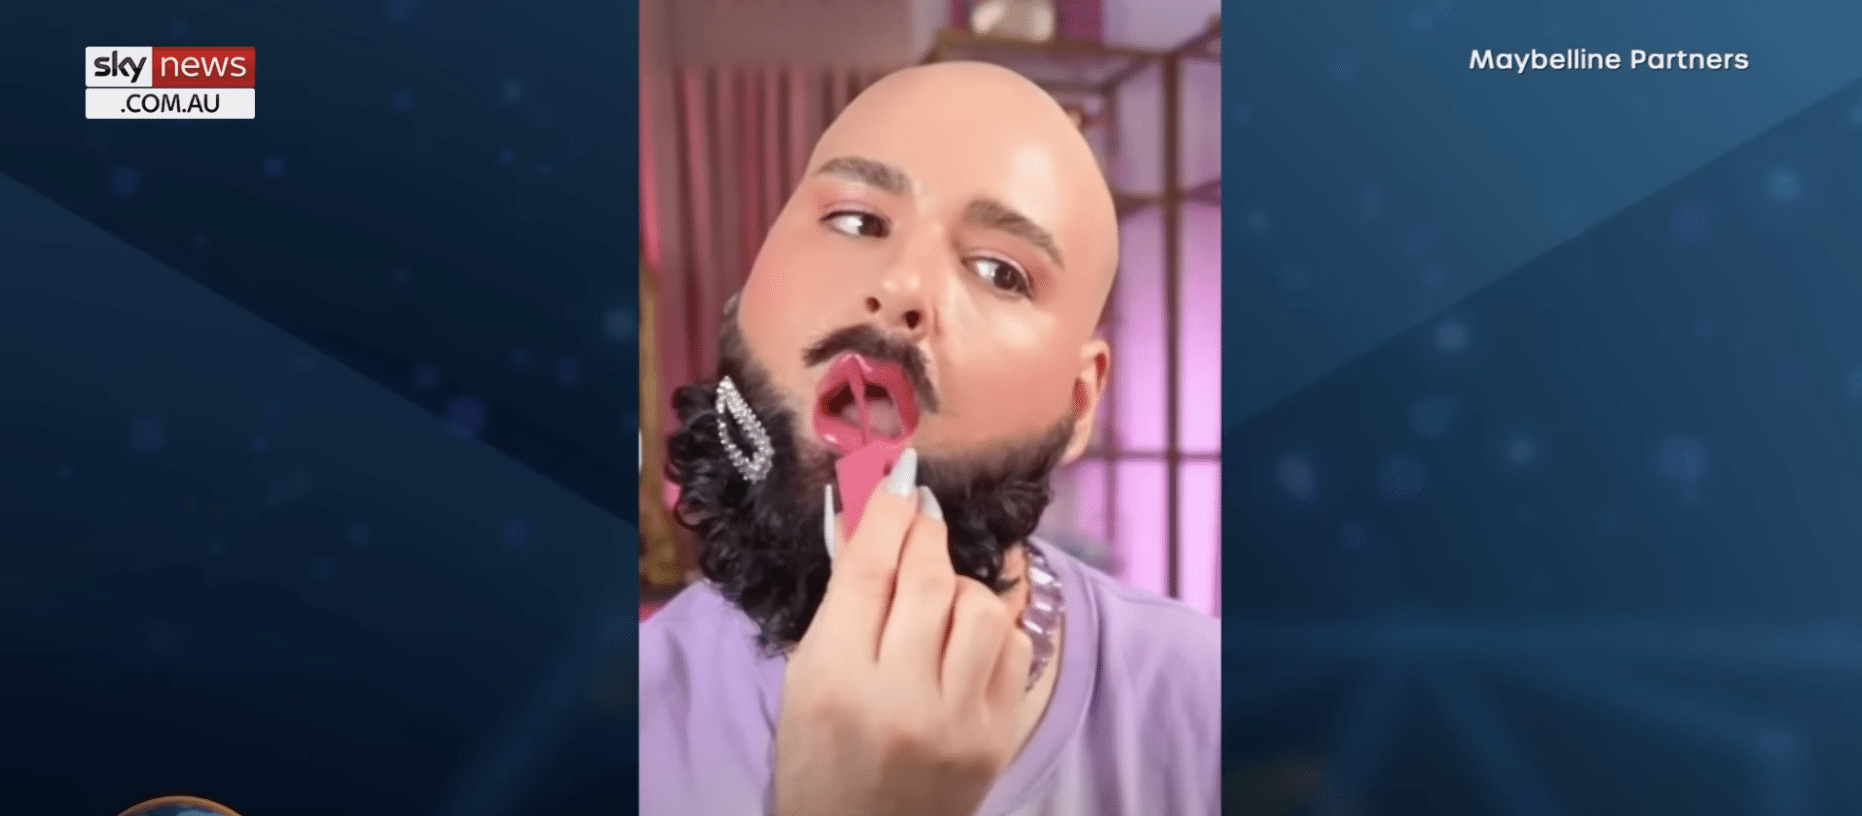 (WATCH) Maybelline uses bearded men to promote their new makeup line